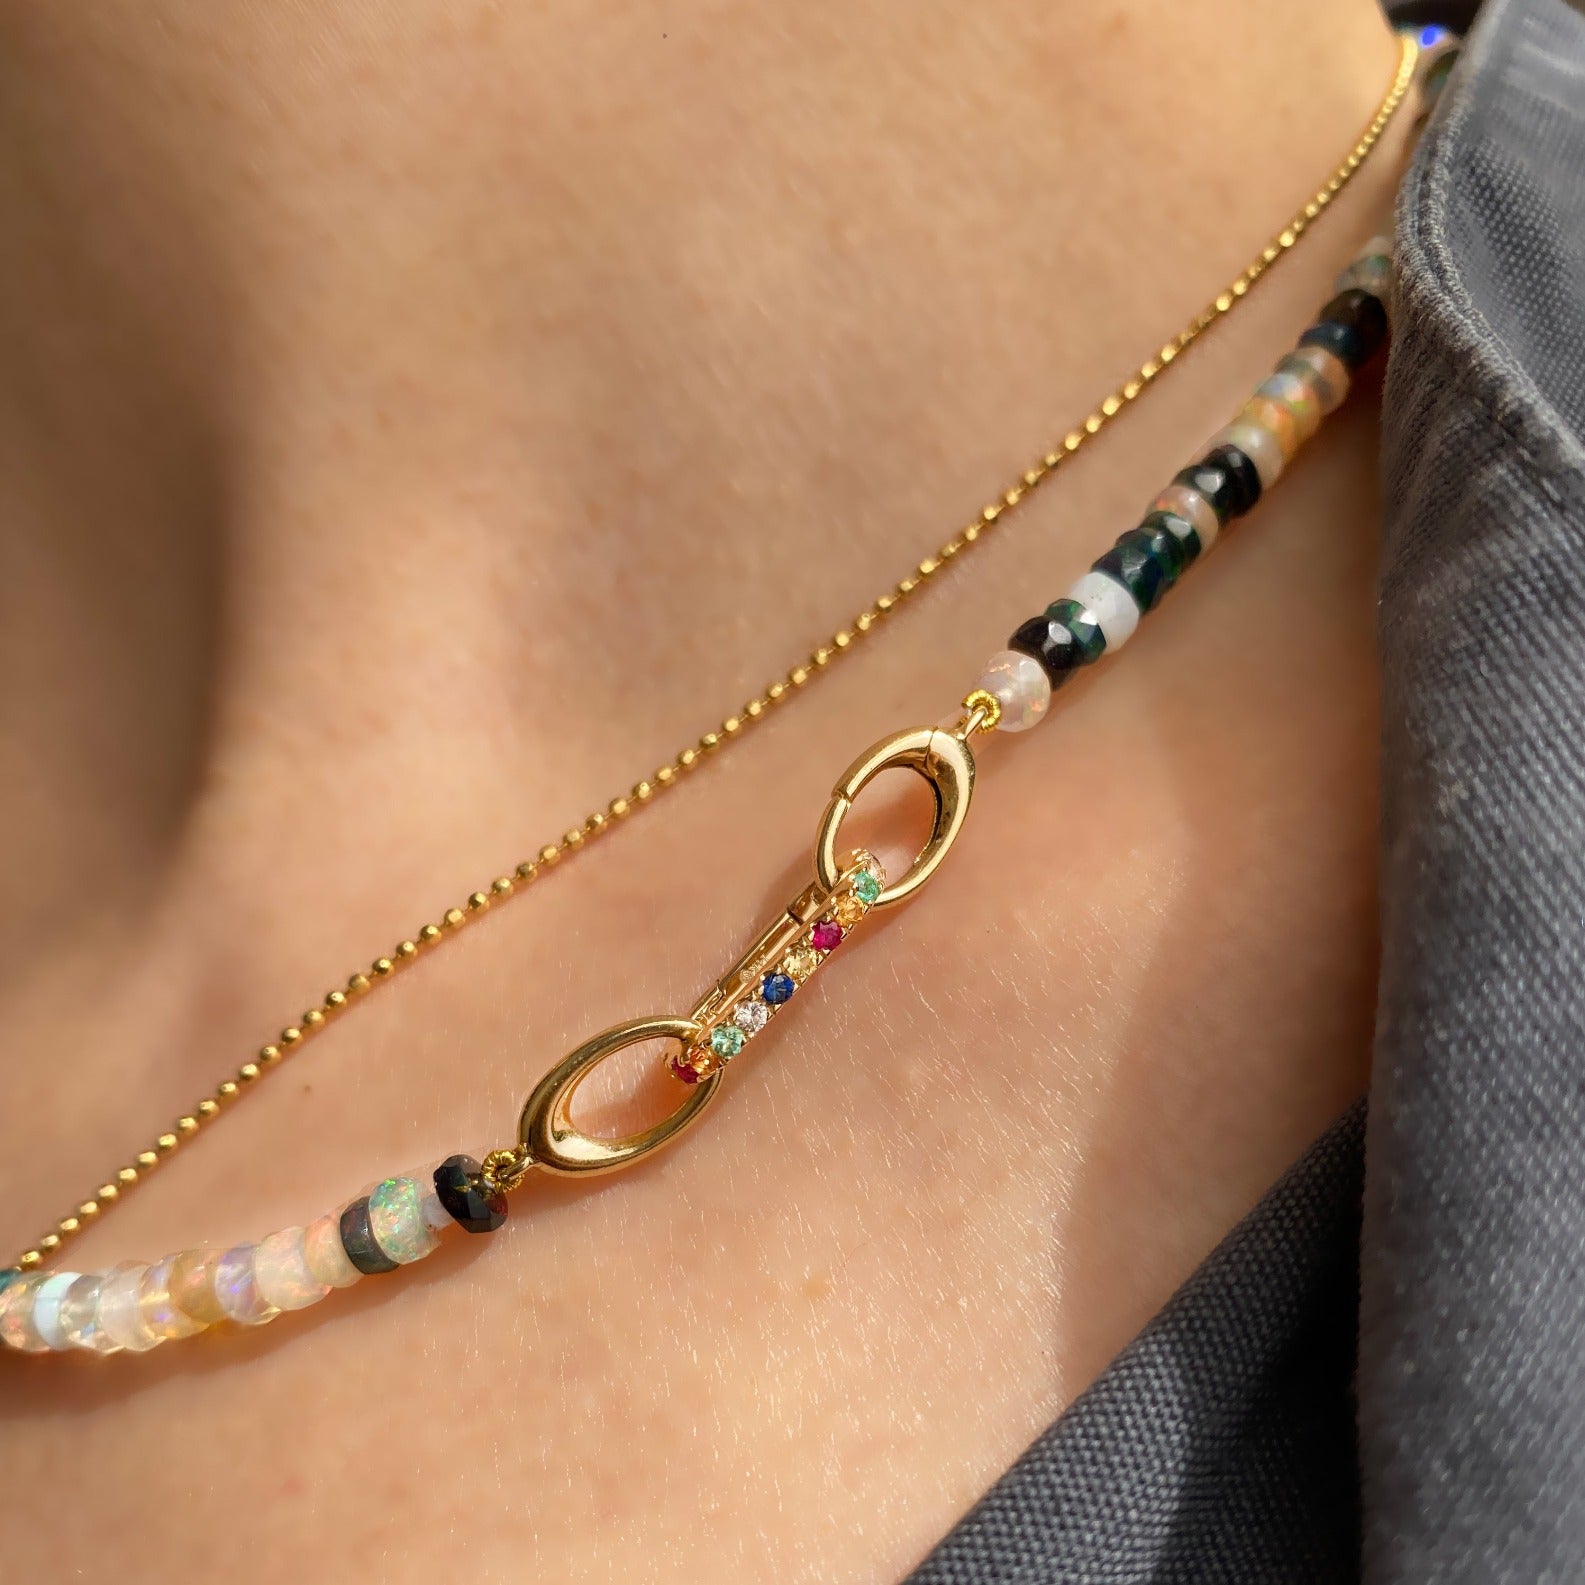 14k yellow gold small oval locking charm with rainbow colored stones. Styled on a neck locked into oval clasps of a beaded necklace.